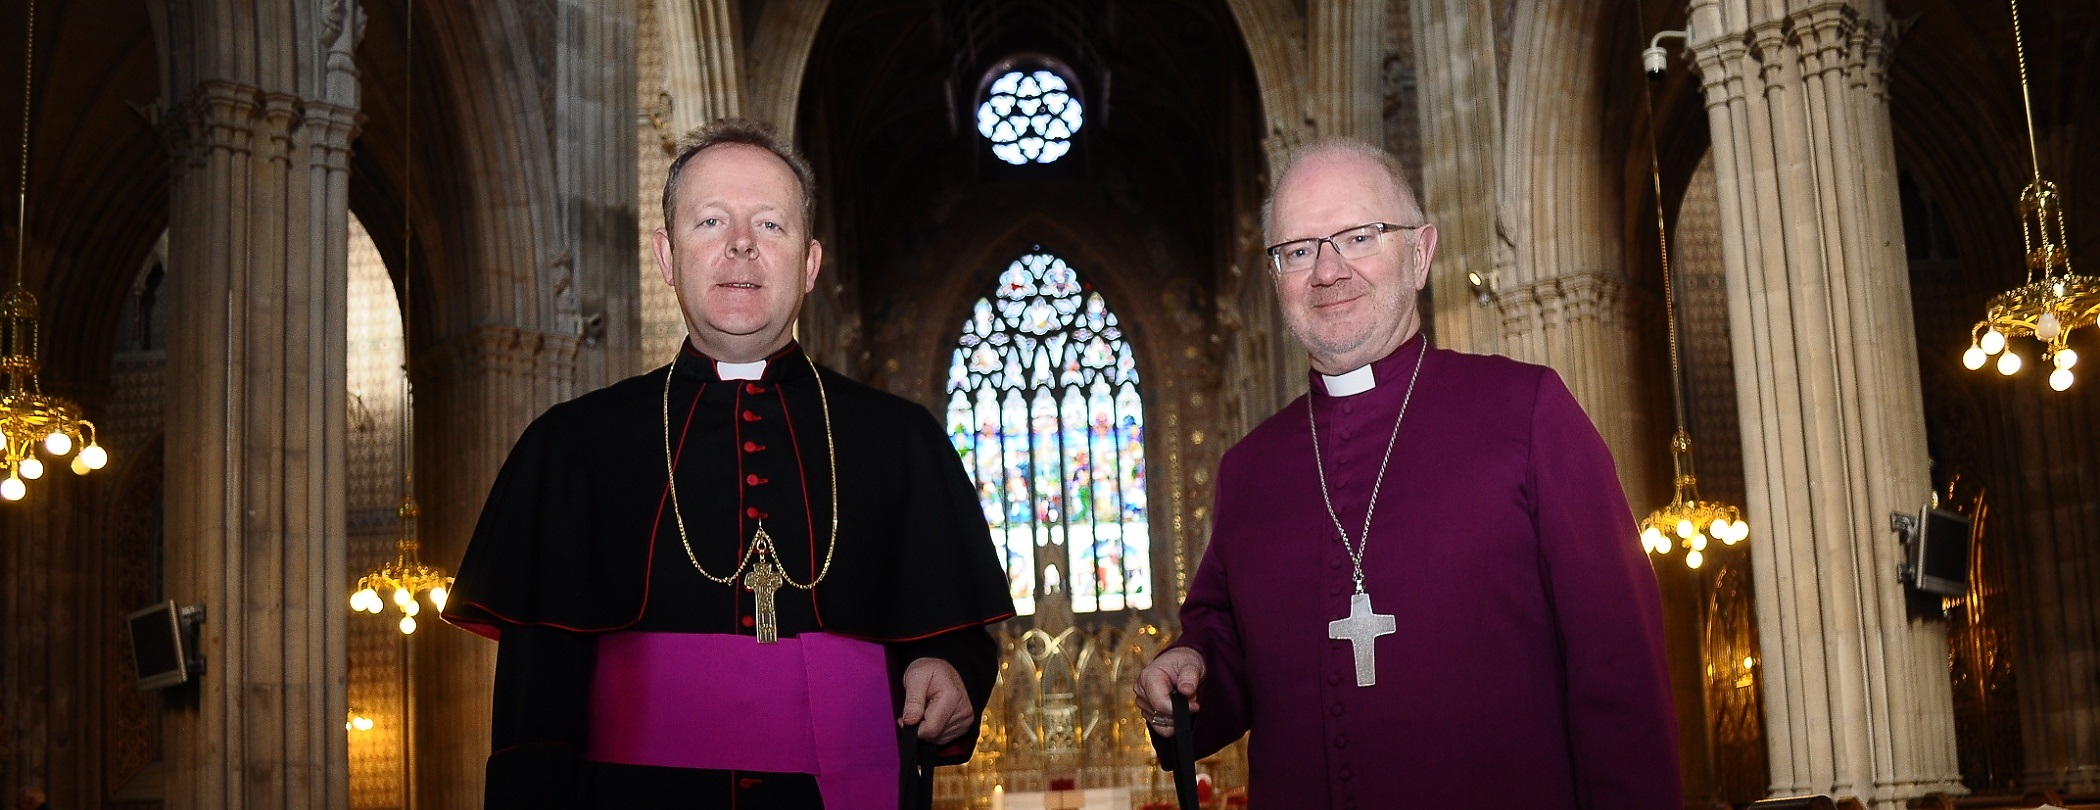 Archbishop Eamon Martin and Archbishop Richard Clarke at  Launch of Flesh and Blood Ireland    St Patrick's Cathedral , Armagh,   2 March 2015 Credit: LiamMcArdle.com